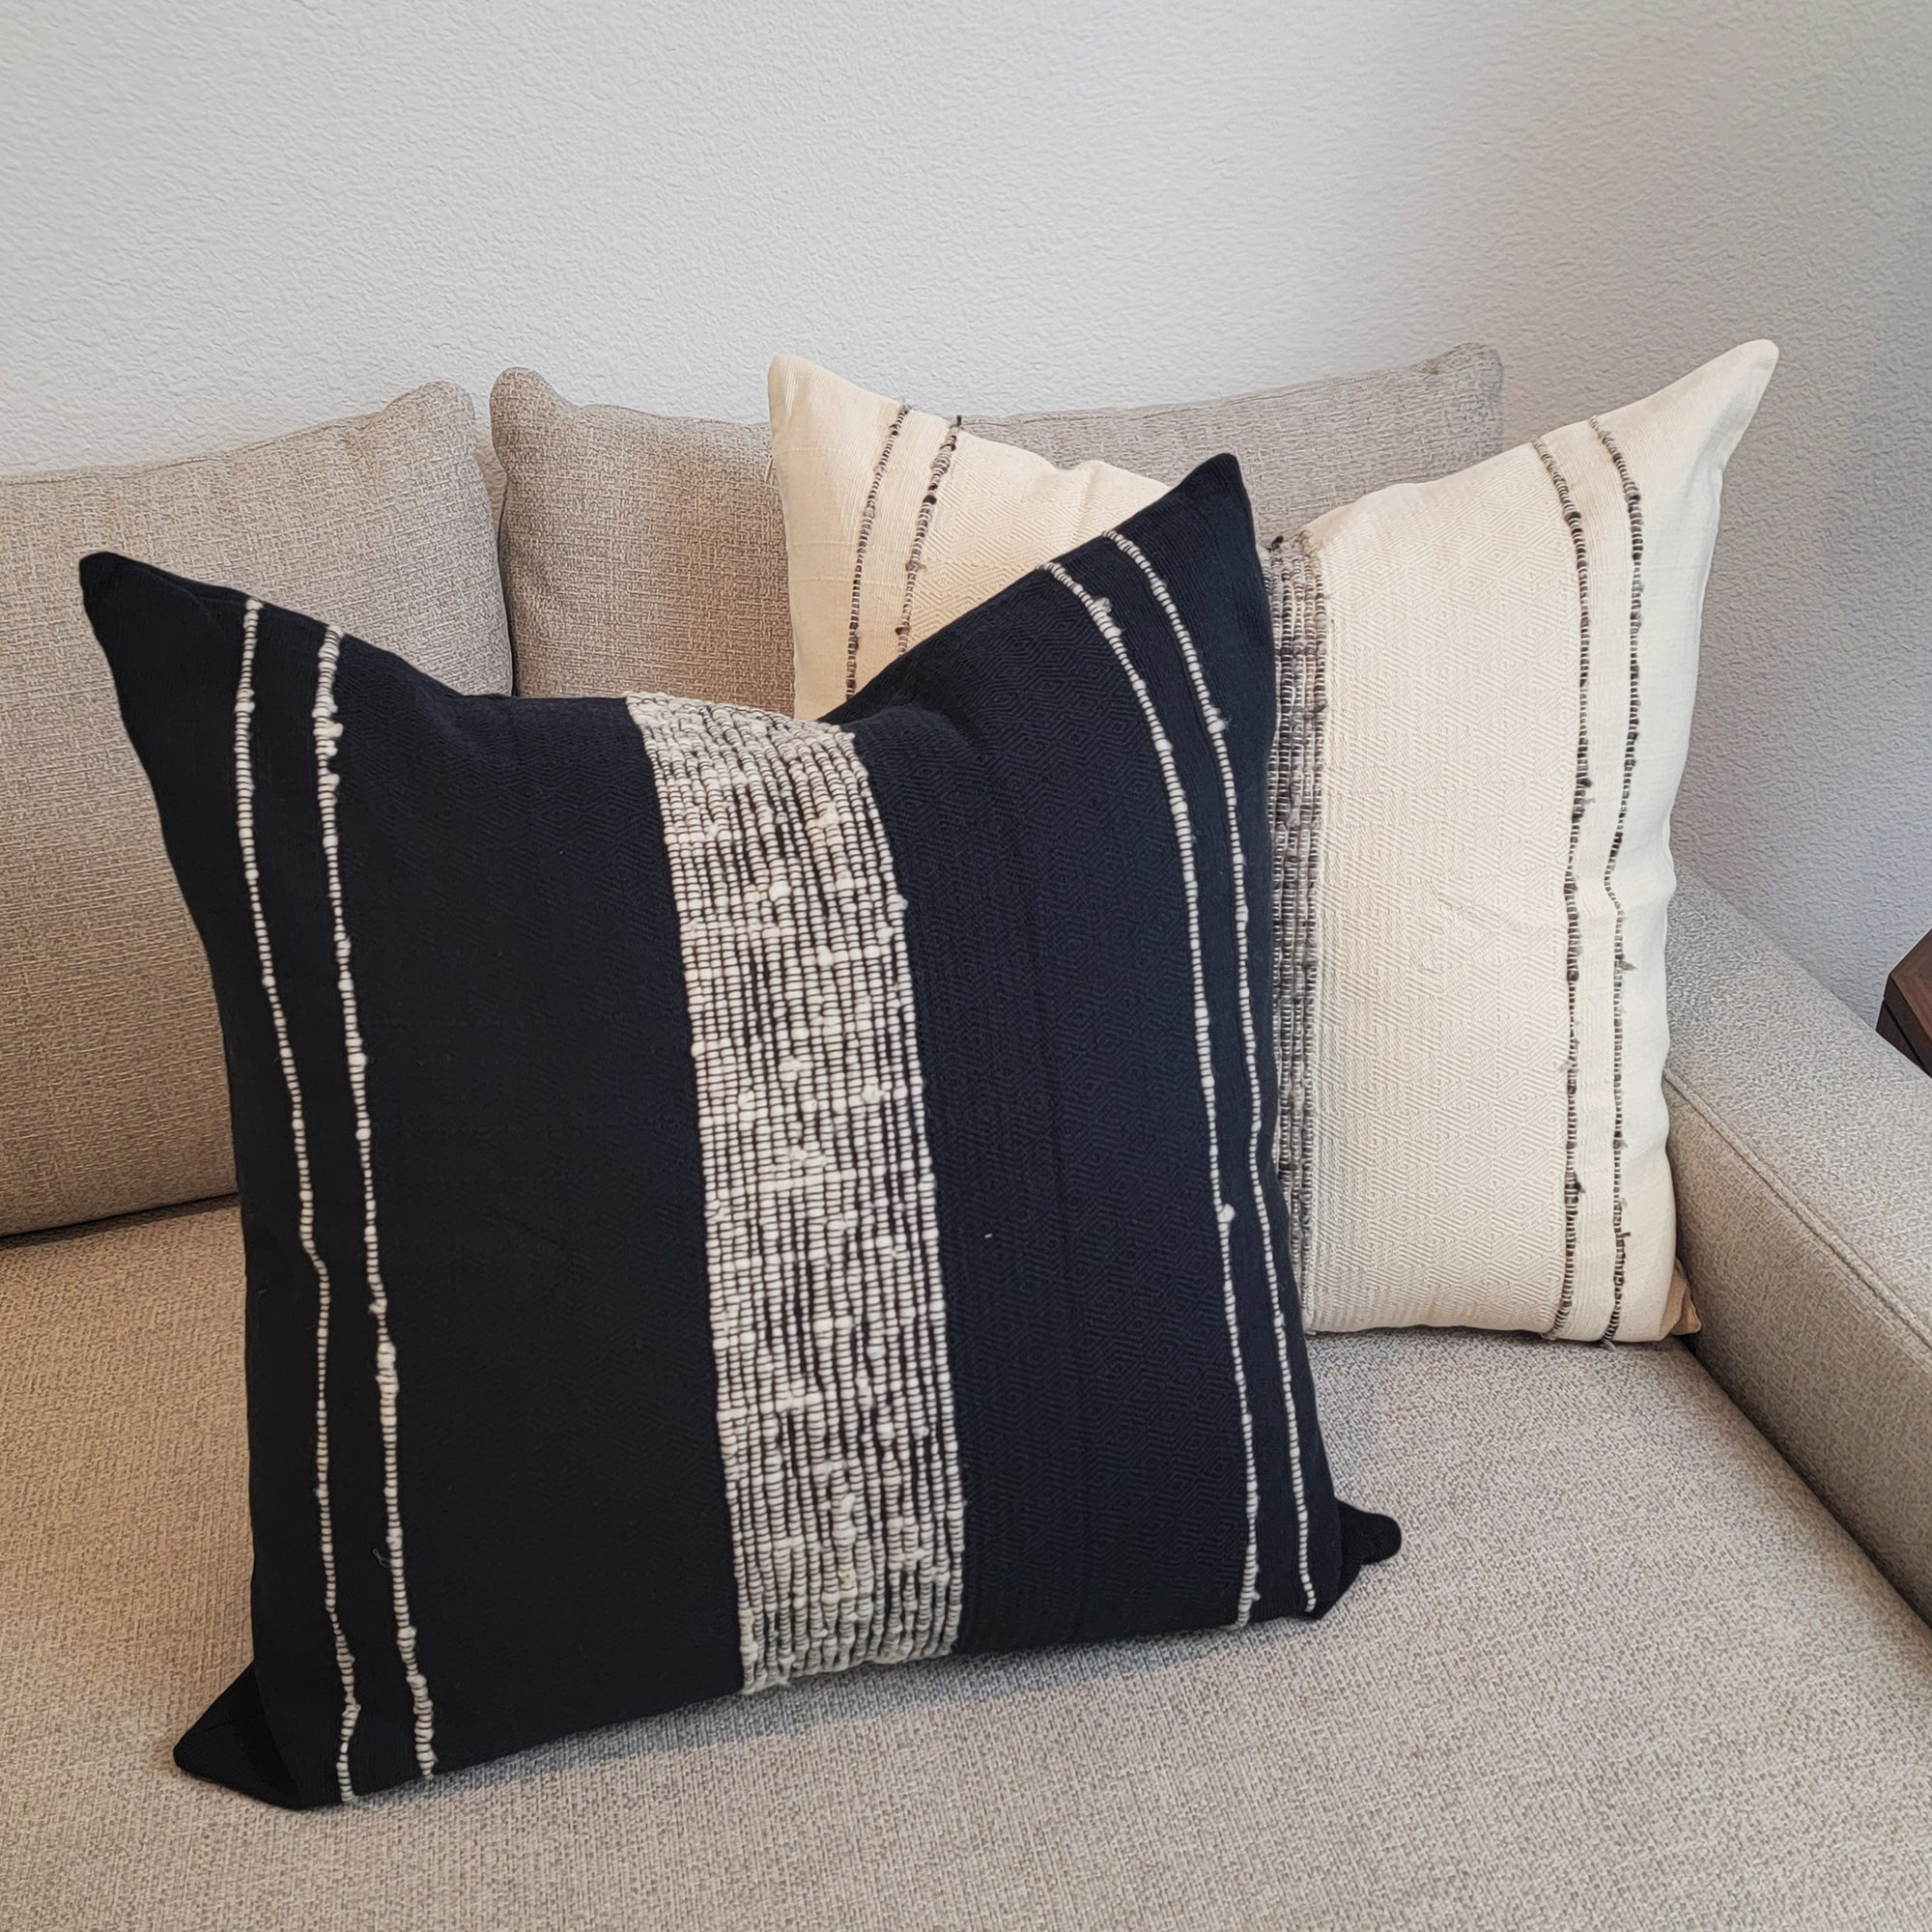 Black and Ivory Woven Bogota Pillows